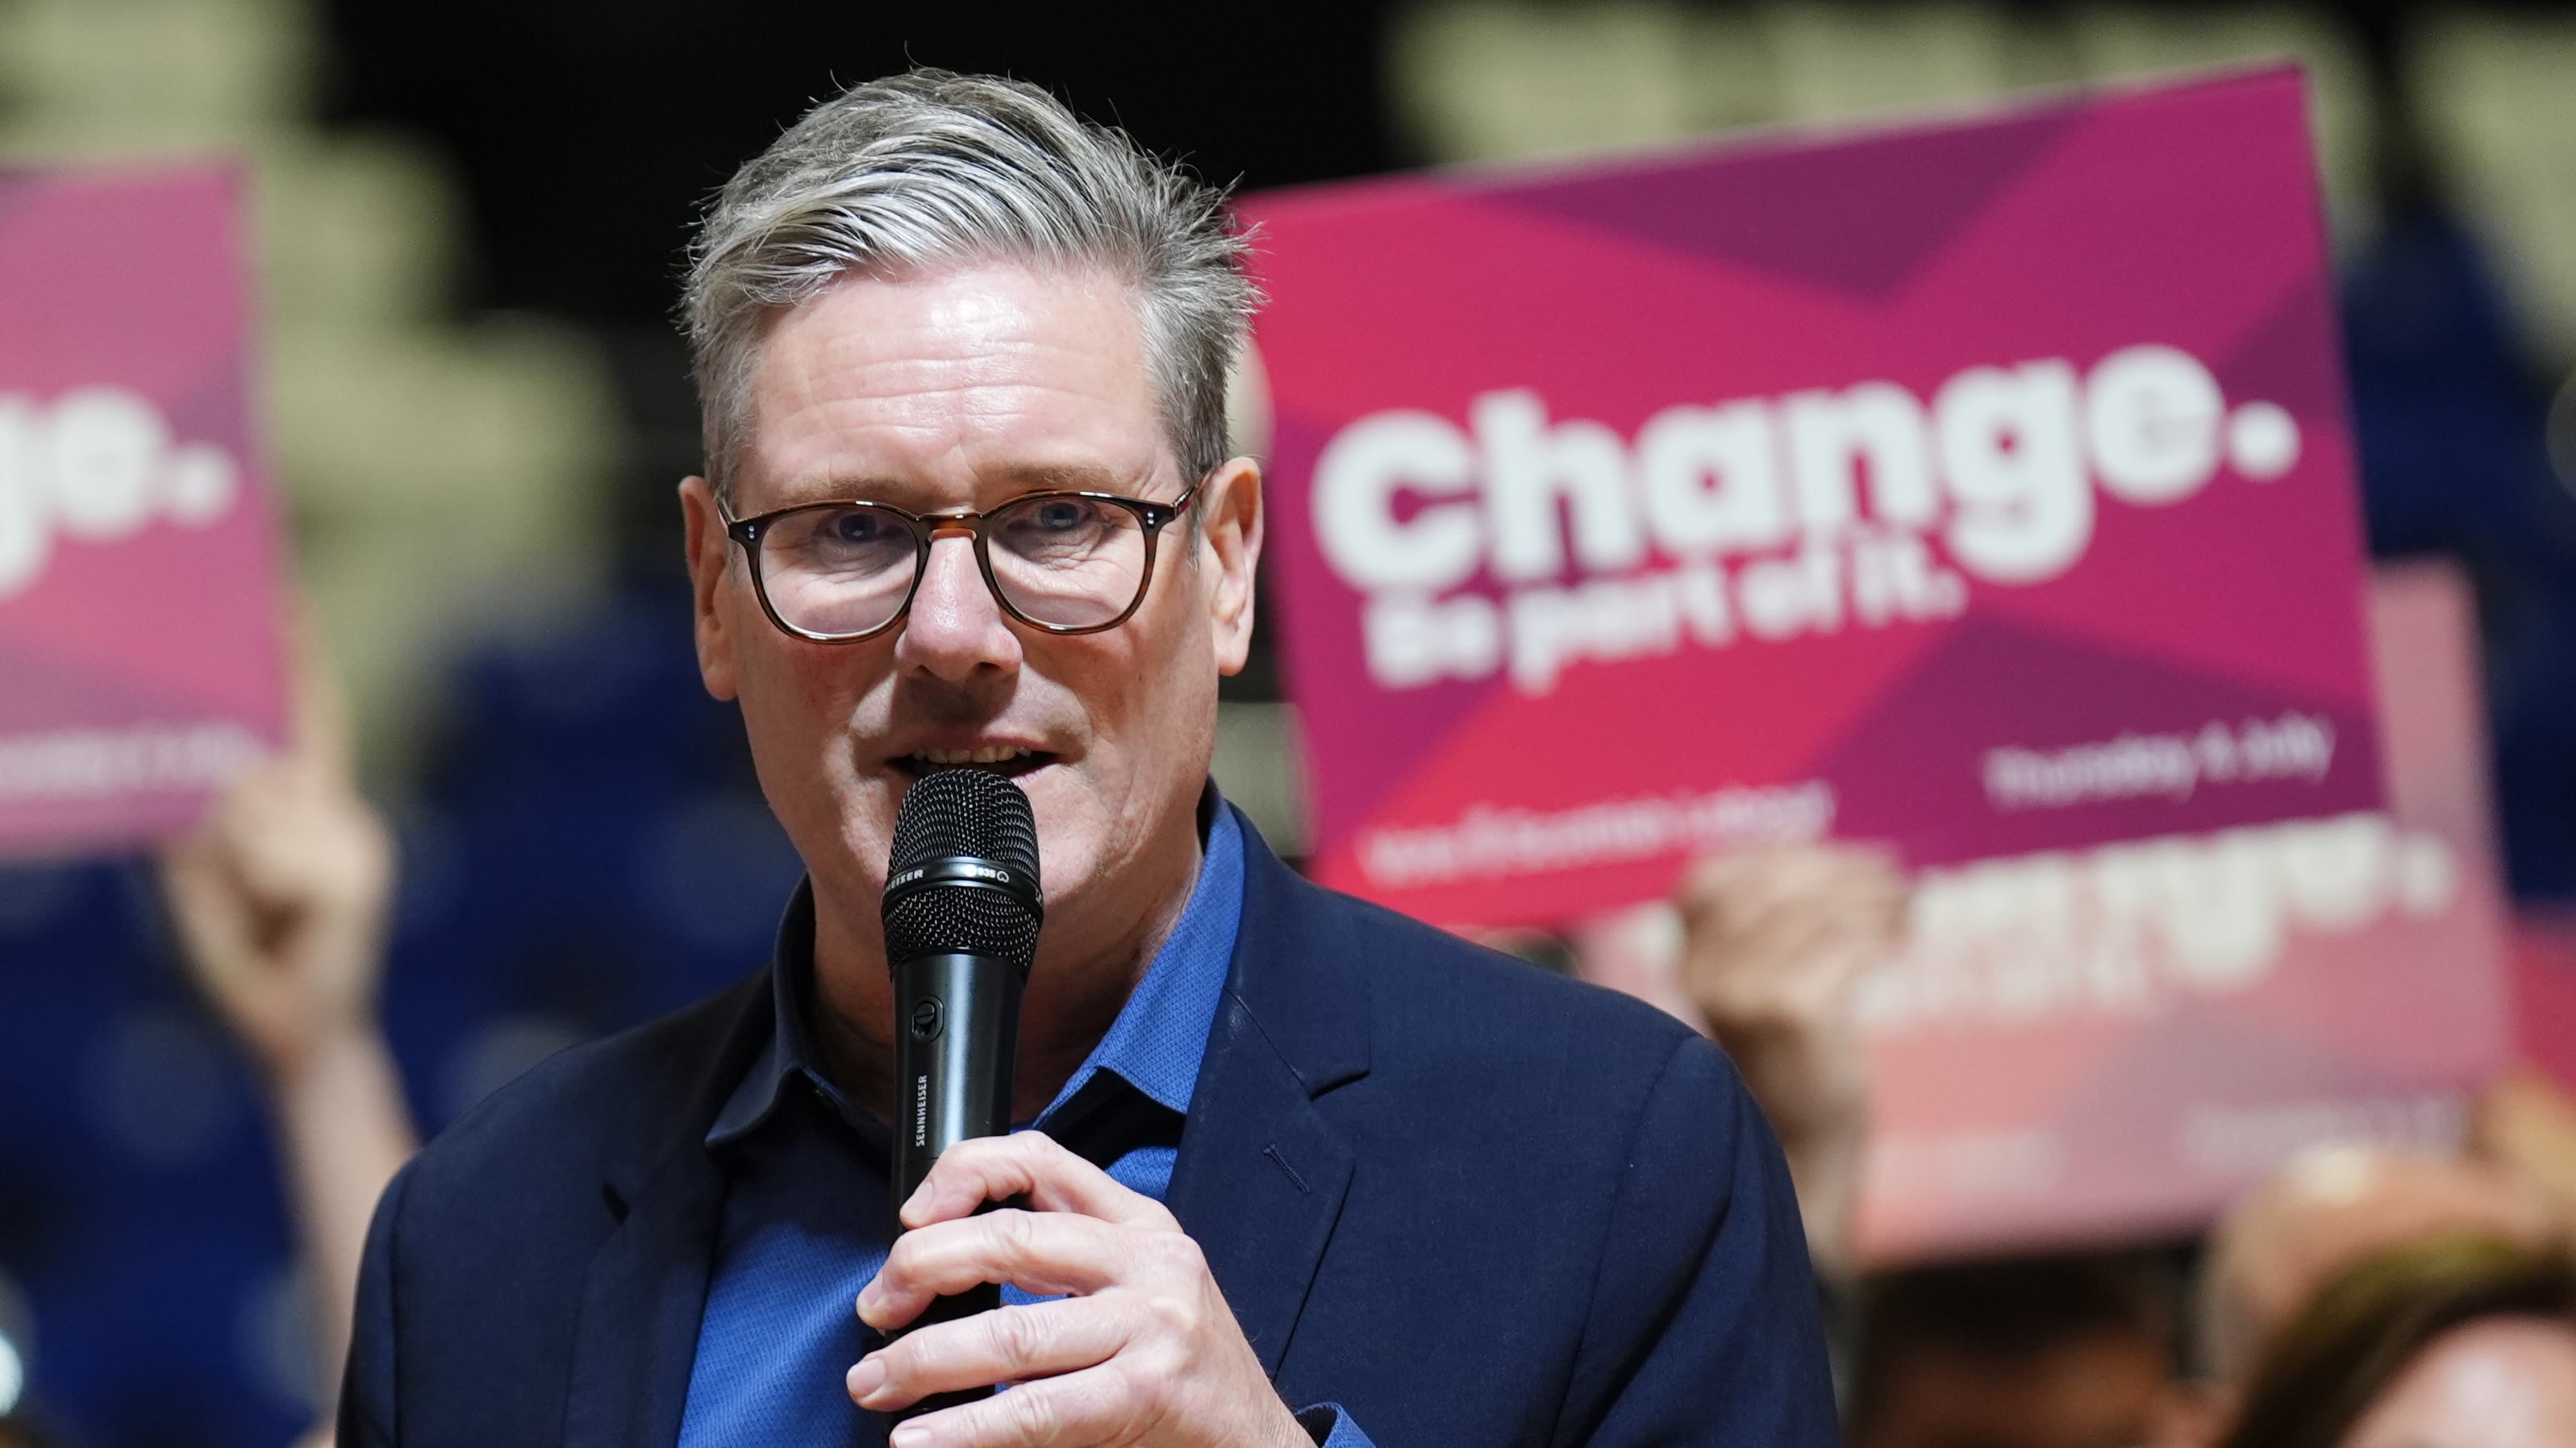 Labour leader Sir Keir Starmer has vowed to protect his children’s privacy